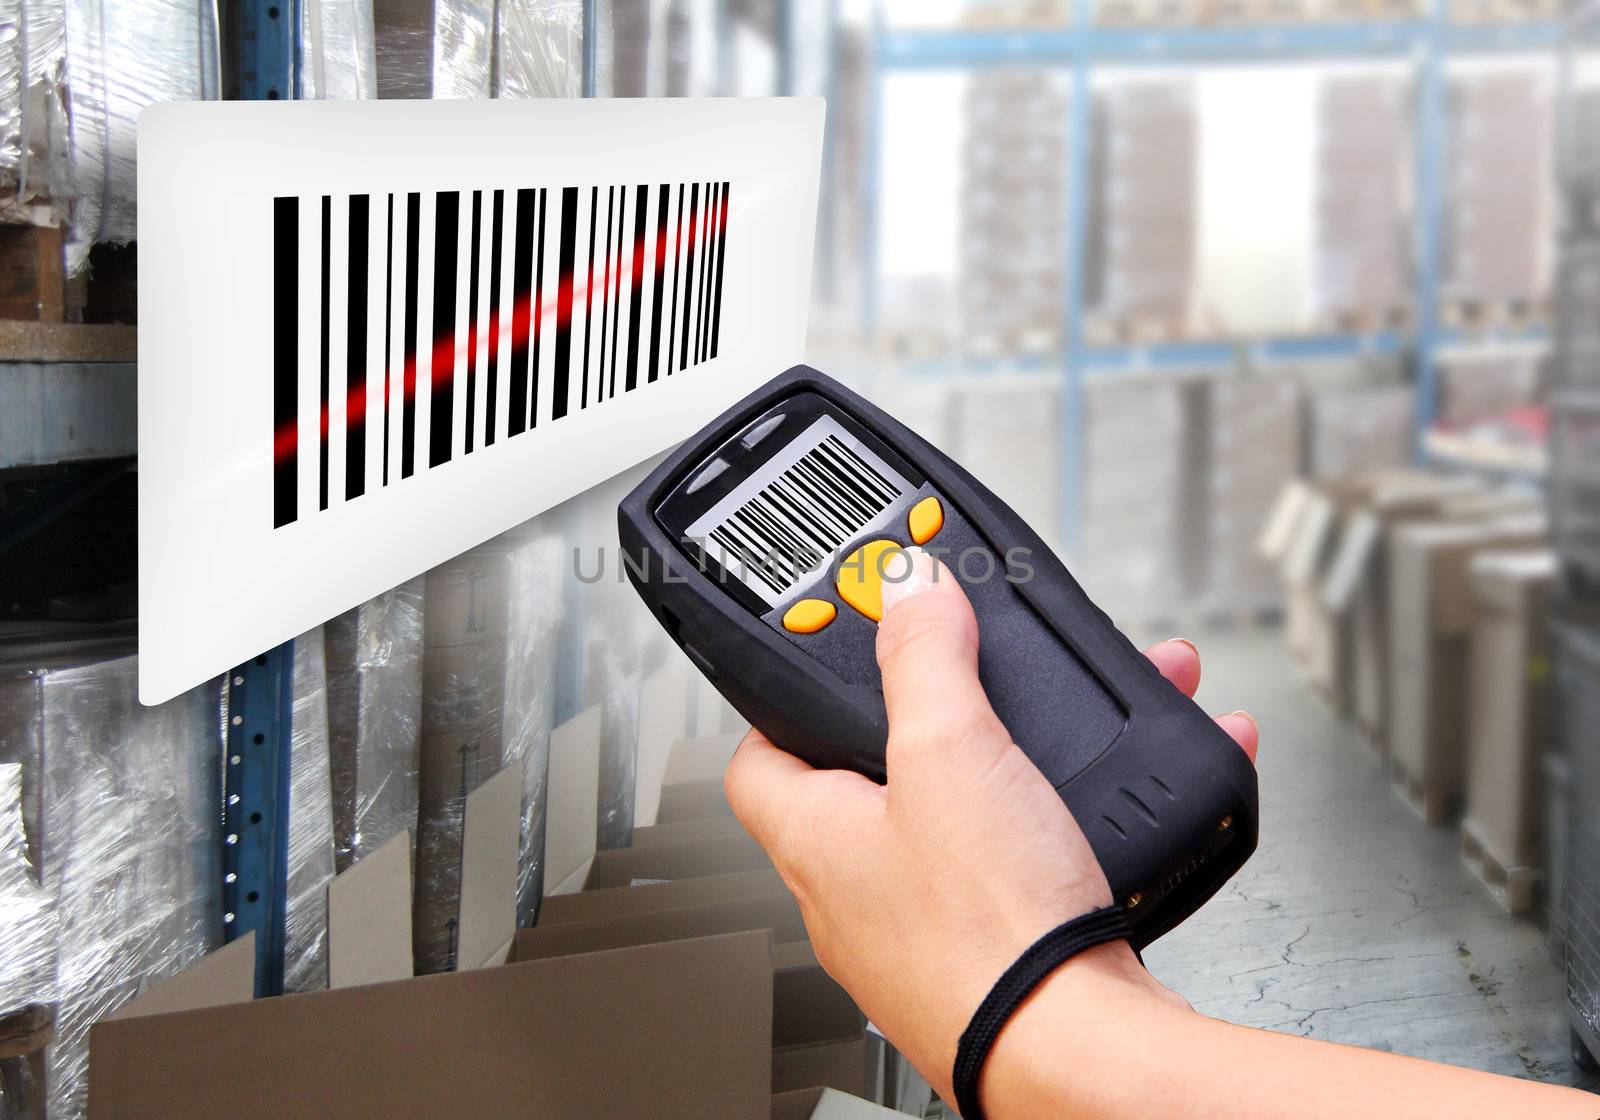 Barcode Scanner by Hasenonkel